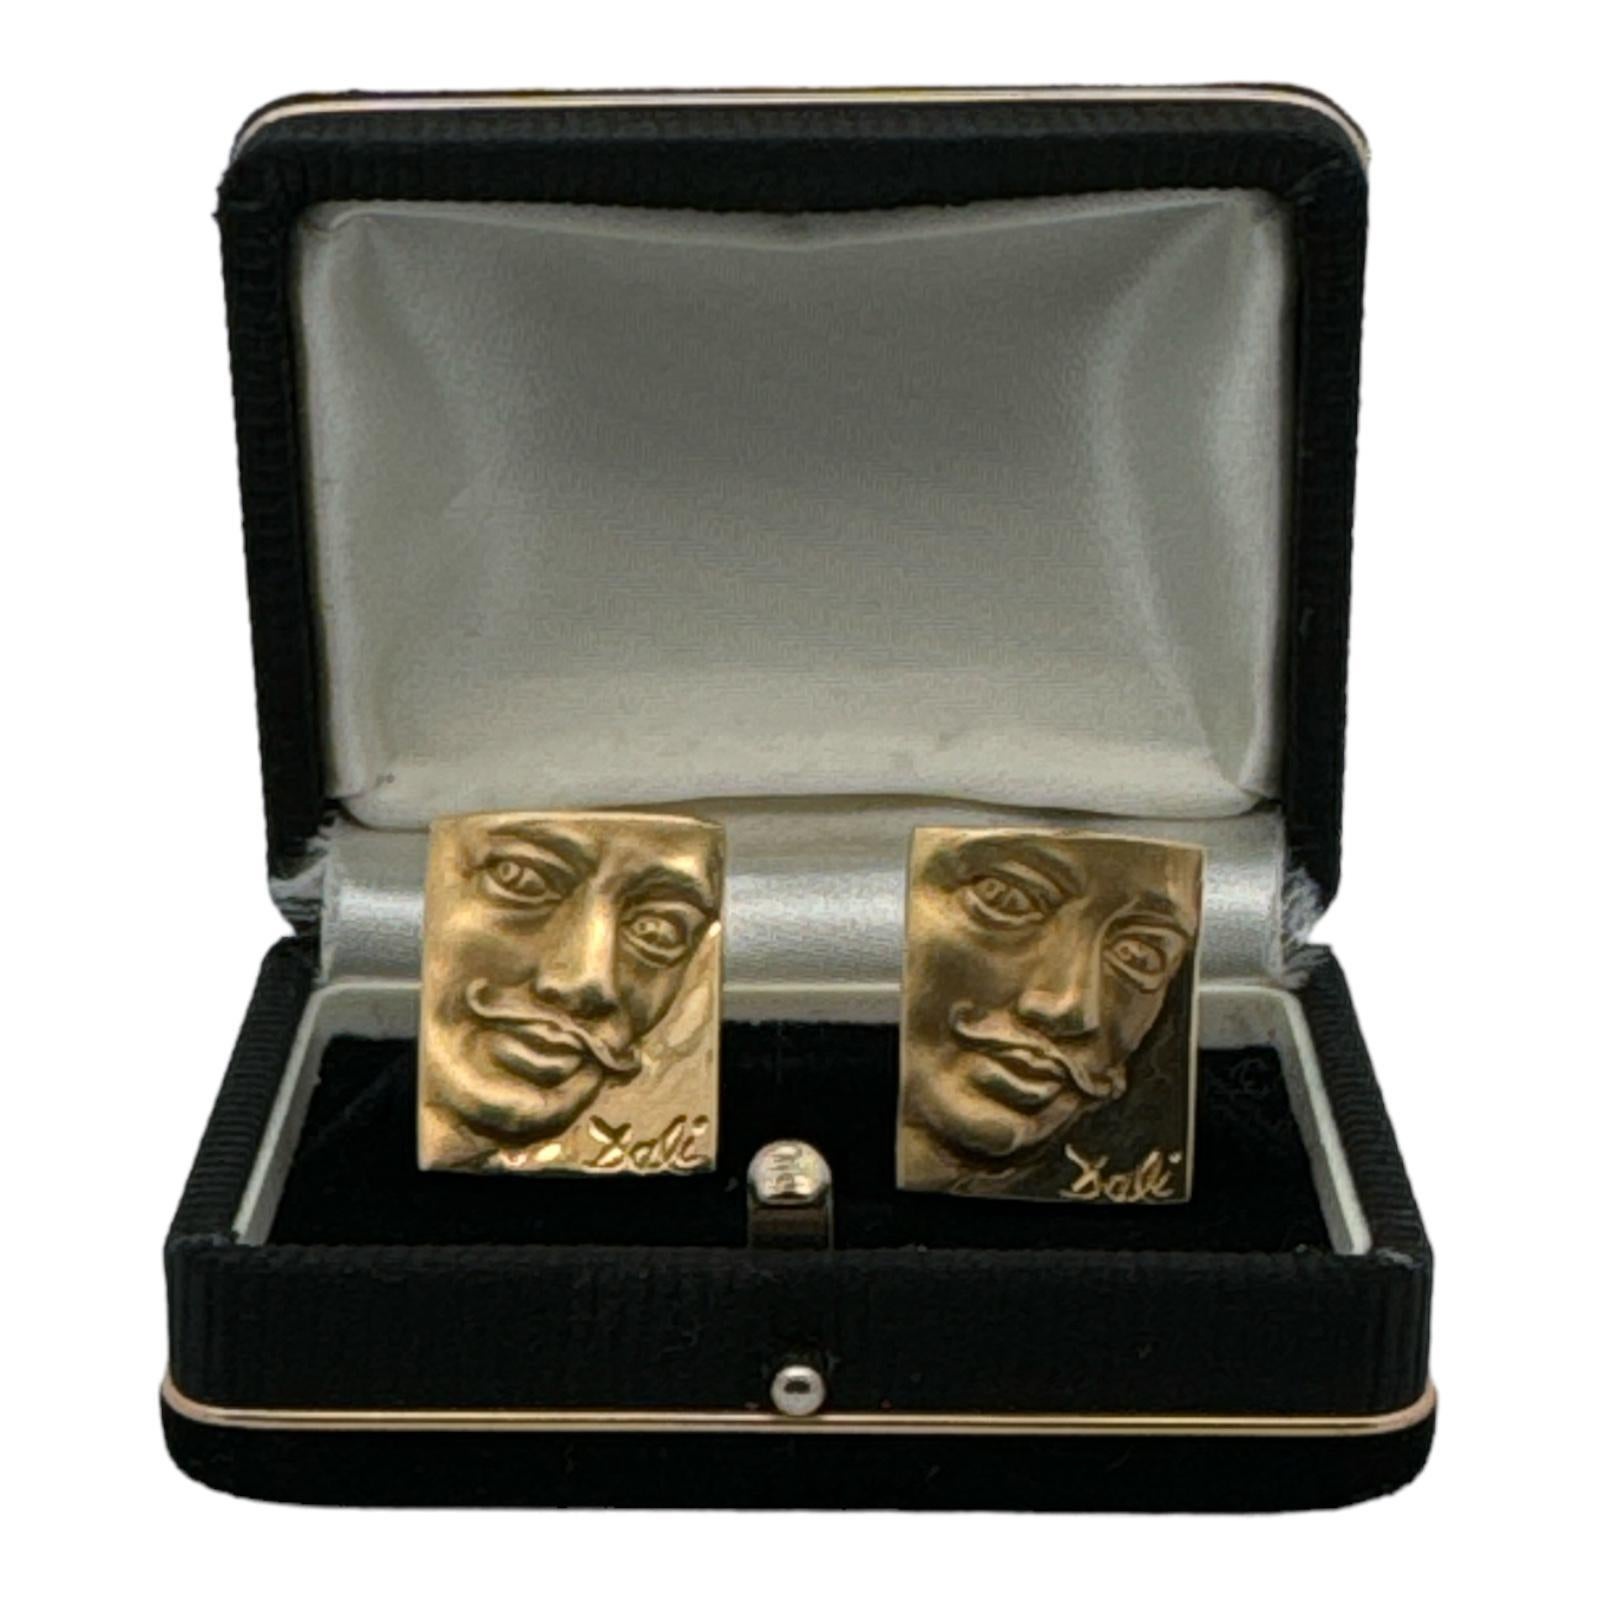 Salvador Dali Museum portrait cufflinks crafted in polished and satin finish 18 karat yellow gold. The cufflinks measure 18 x 22mm and weigh 27.4 grams.